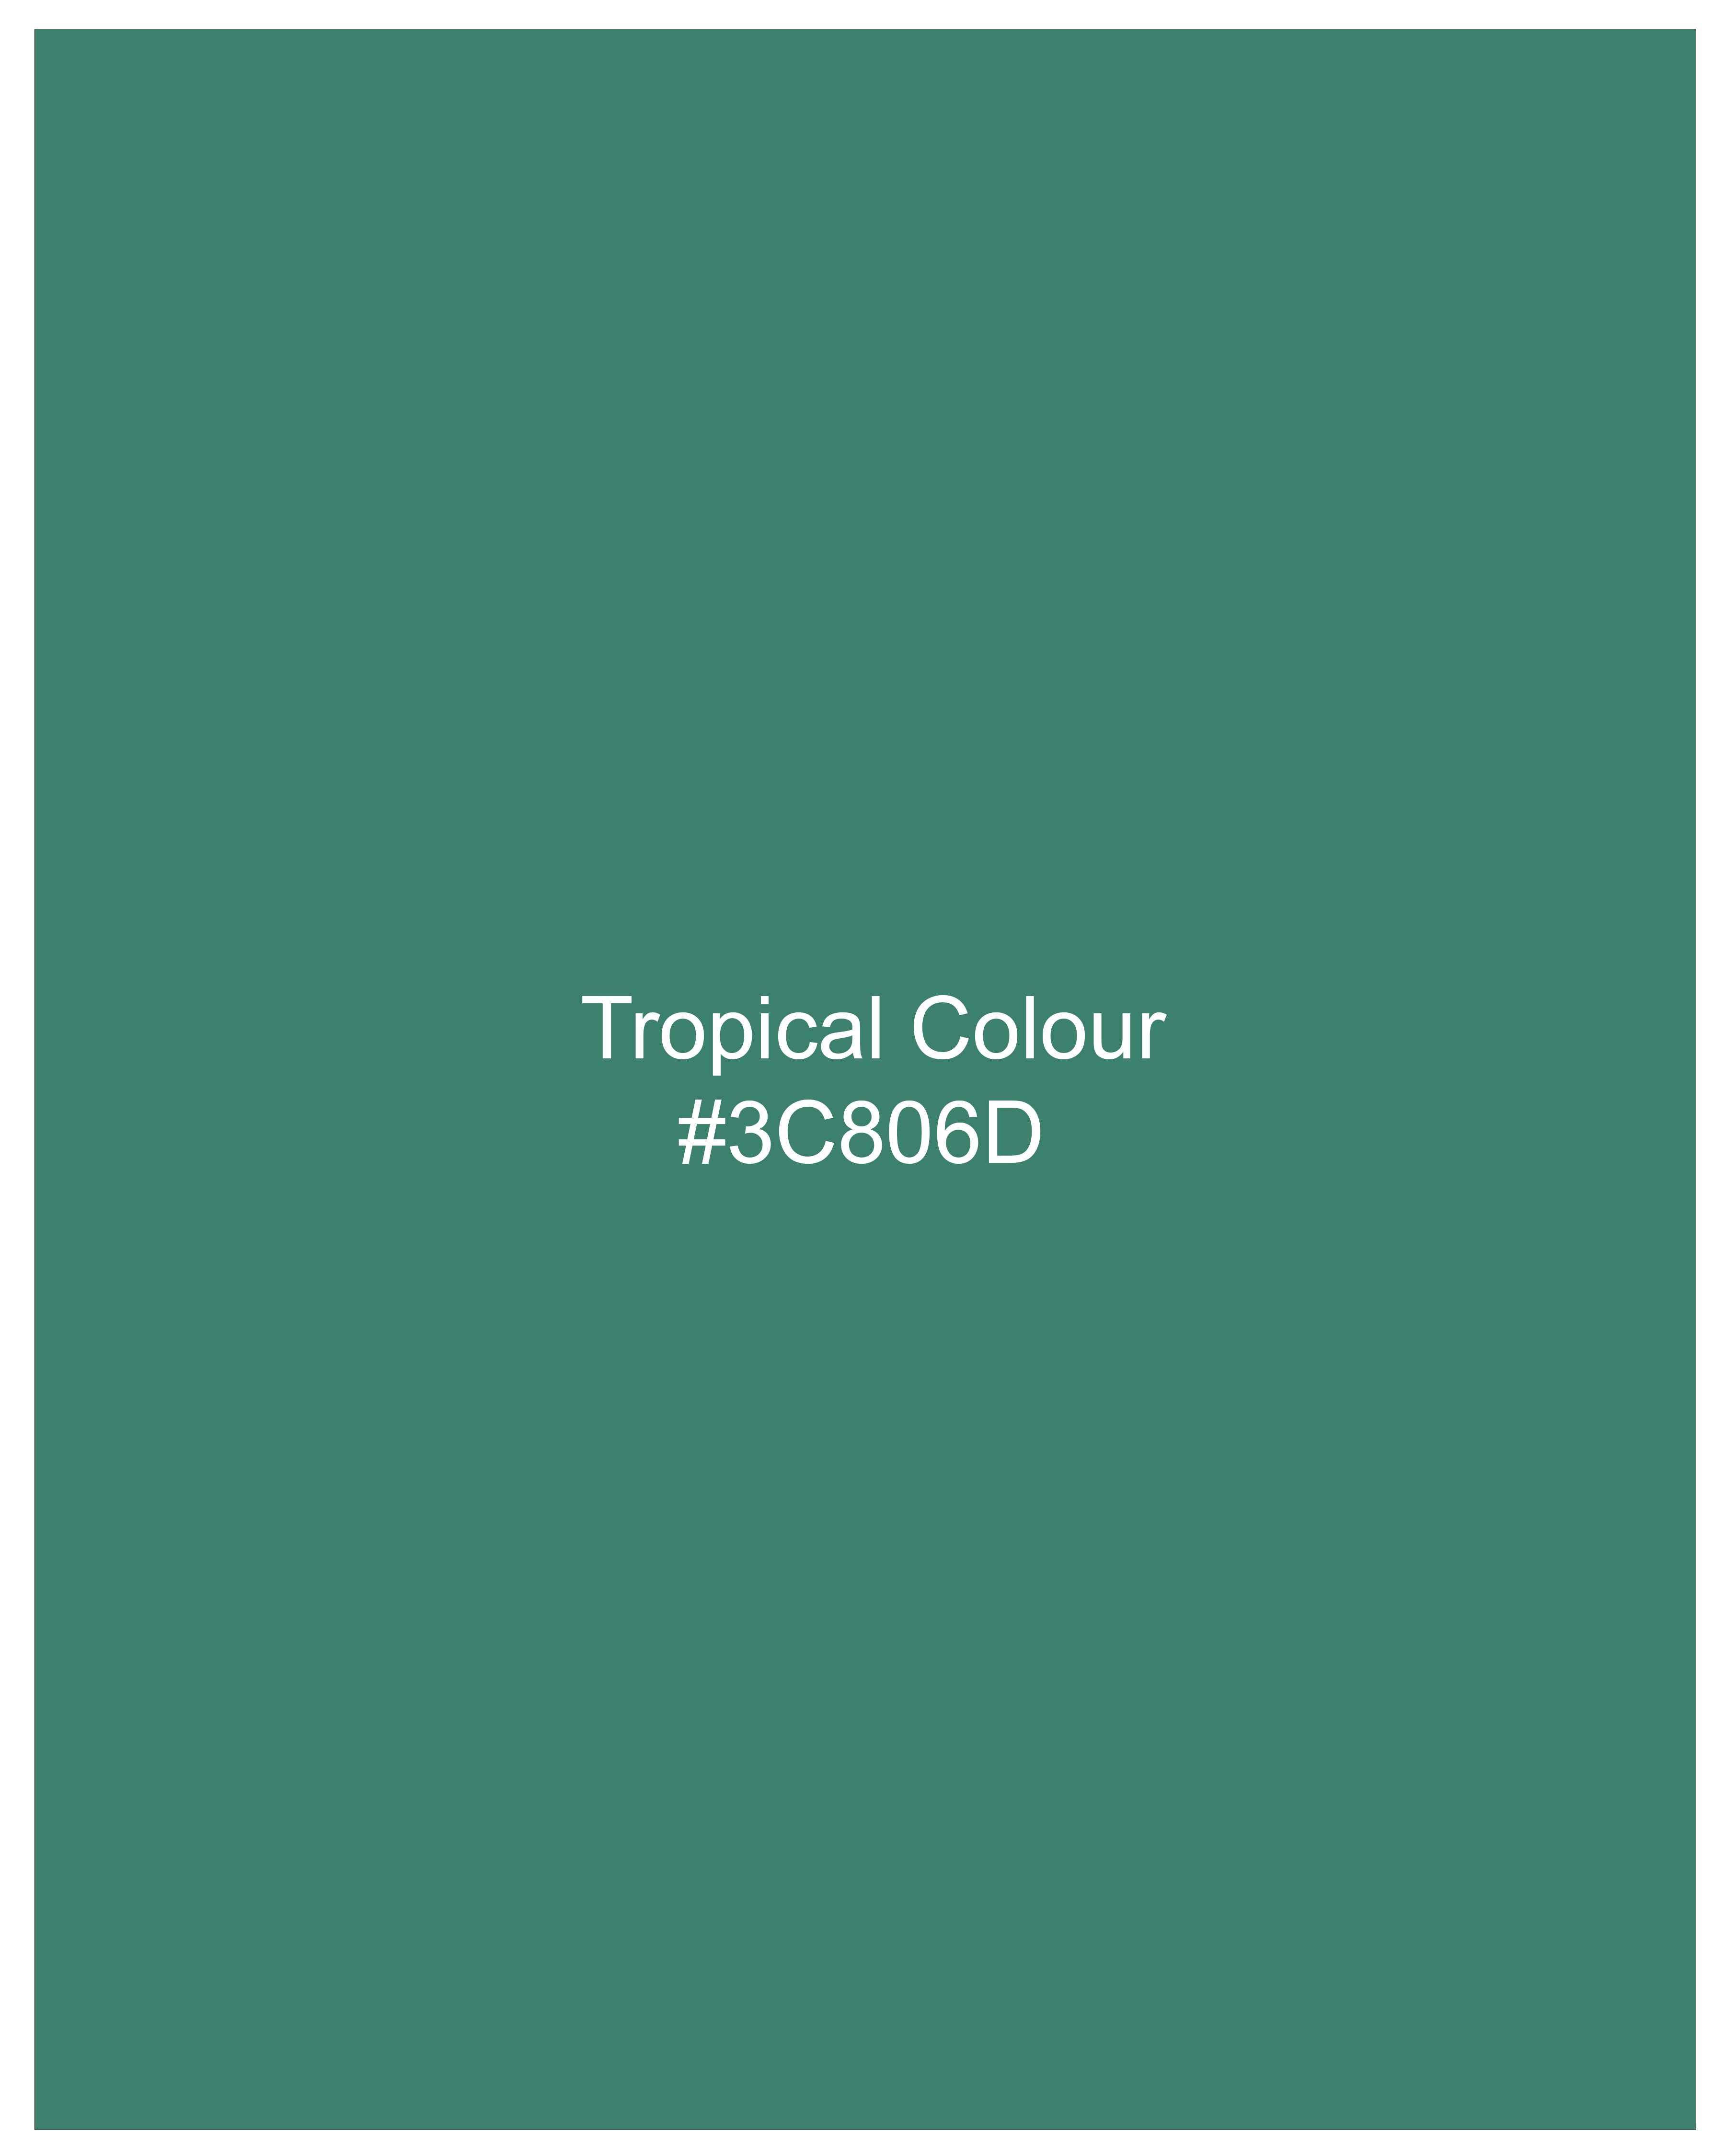 Tropical Green Hand Painted Premium Cotton T-shirt TS005-W005-S, TS005-W005-M, TS005-W005-L, TS005-W005-XL, TS005-W005-XXL